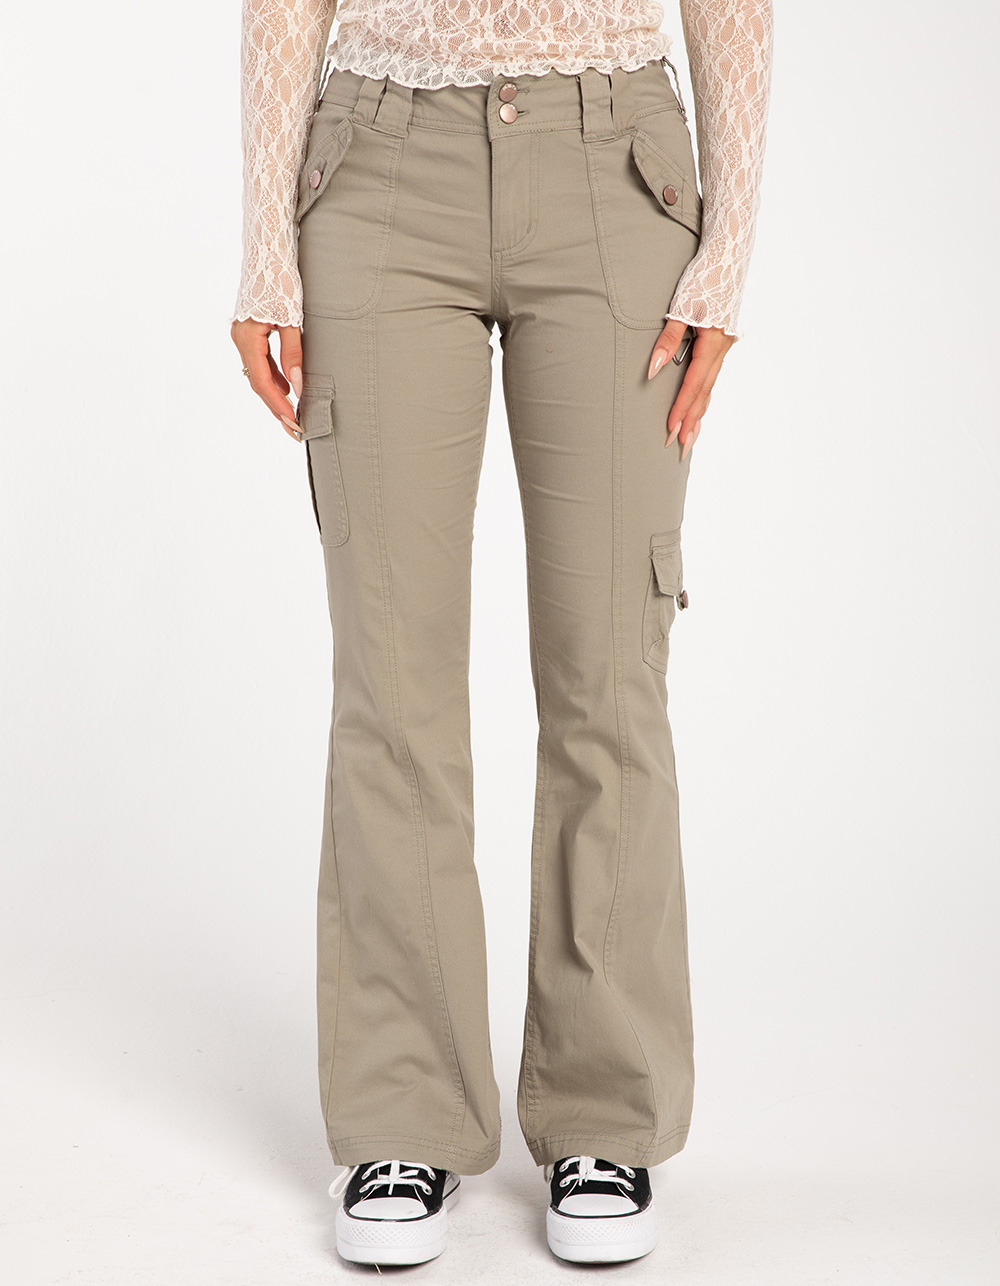 RSQ Womens Low Rise Cargo Flare Pants - LIGHT GRAY